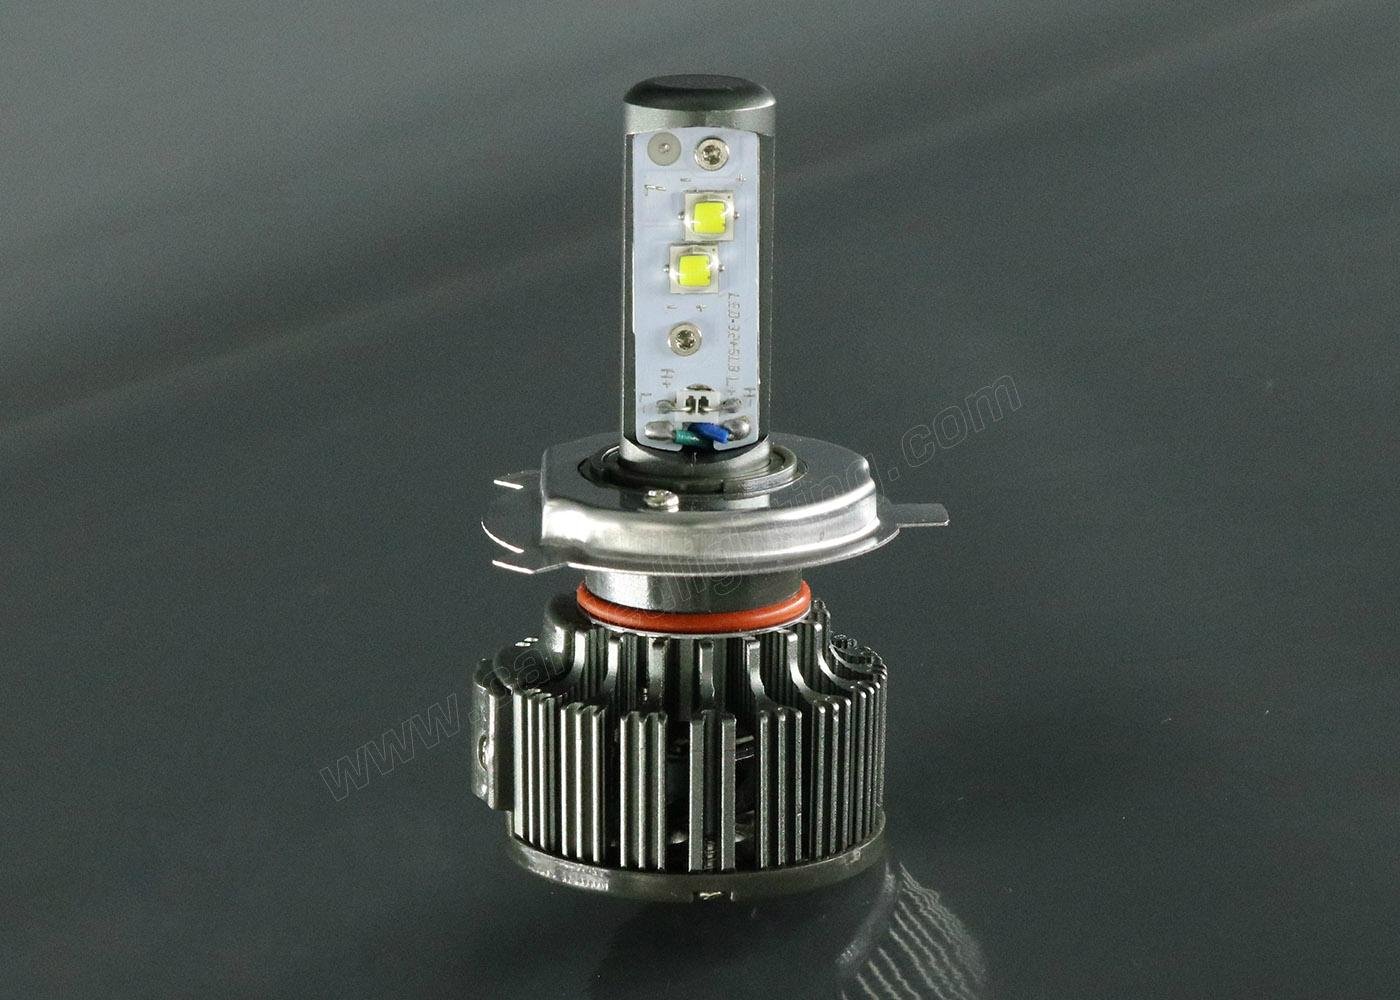 Cheaper Auto LED H4 9003 Bulb Headlight Replacement Lamps For Cars With CREE LED